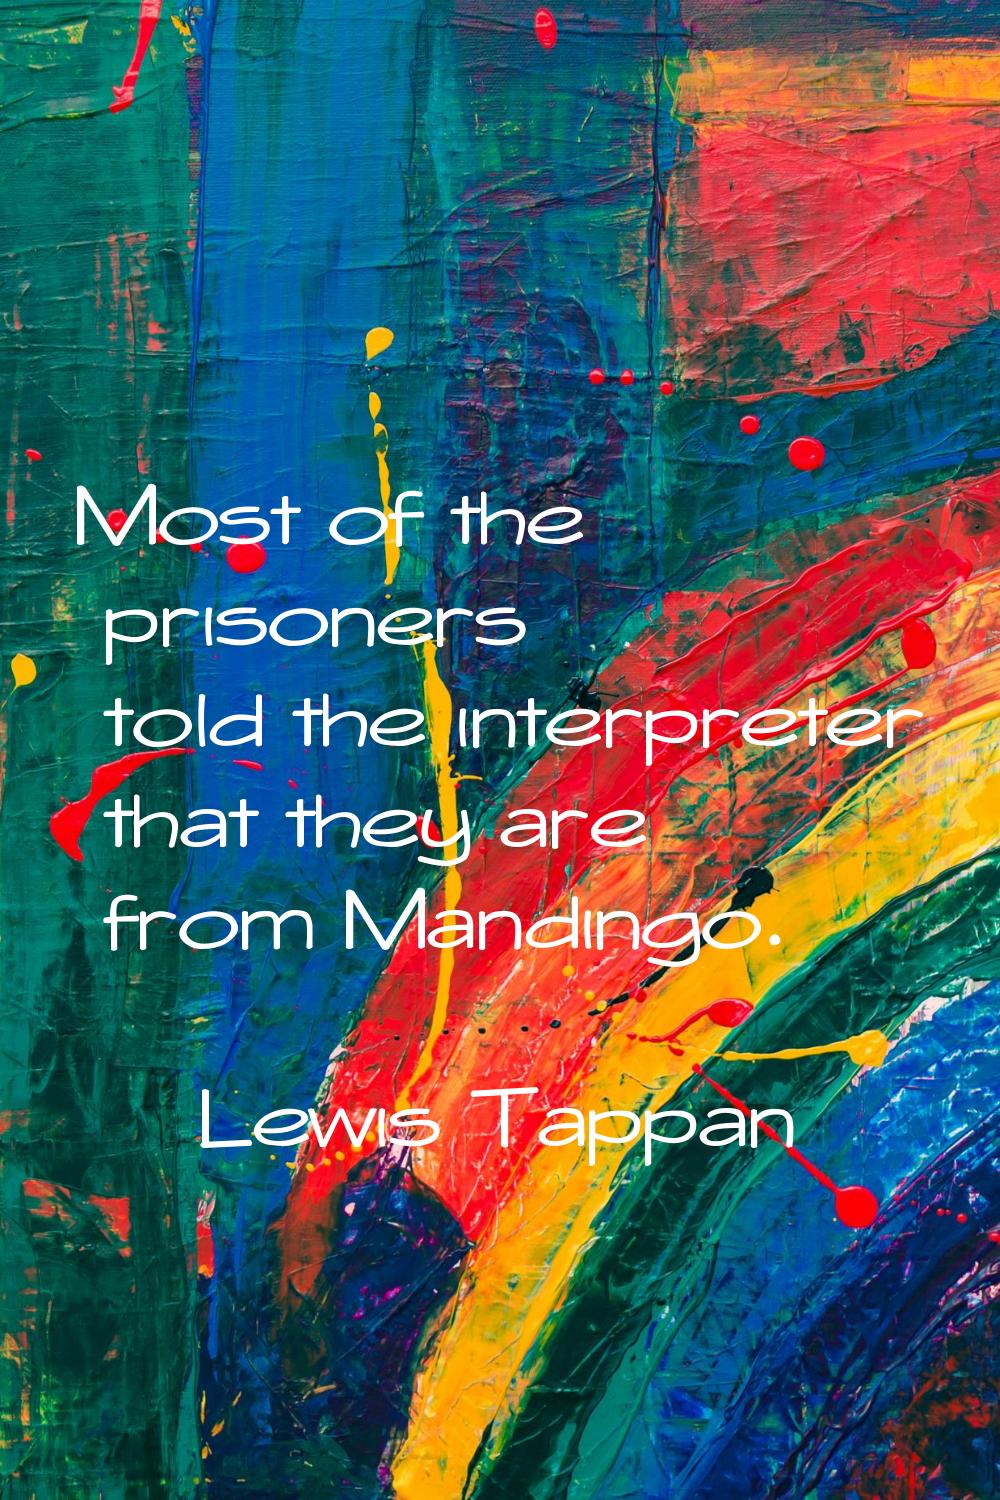 Most of the prisoners told the interpreter that they are from Mandingo.